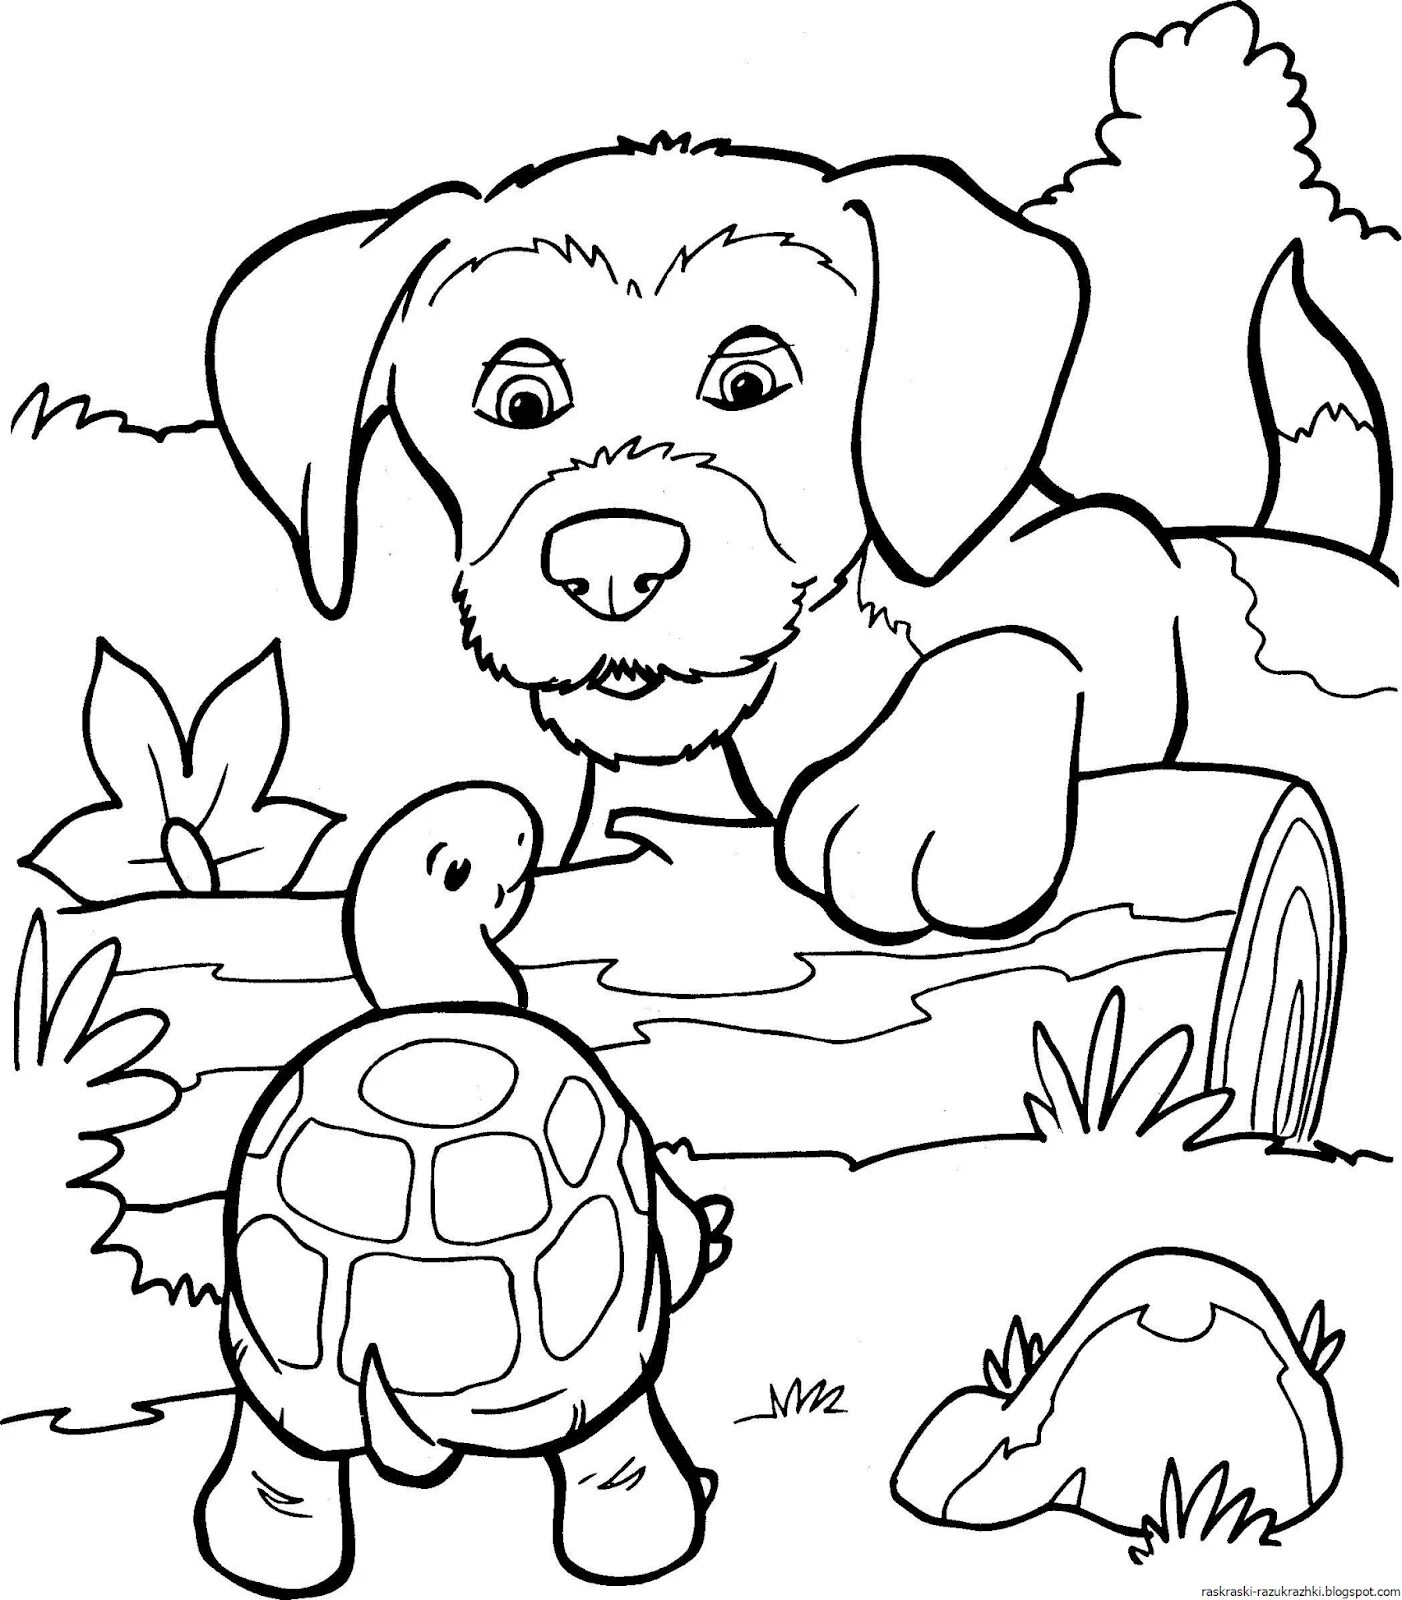 Witty dog ​​boy coloring book